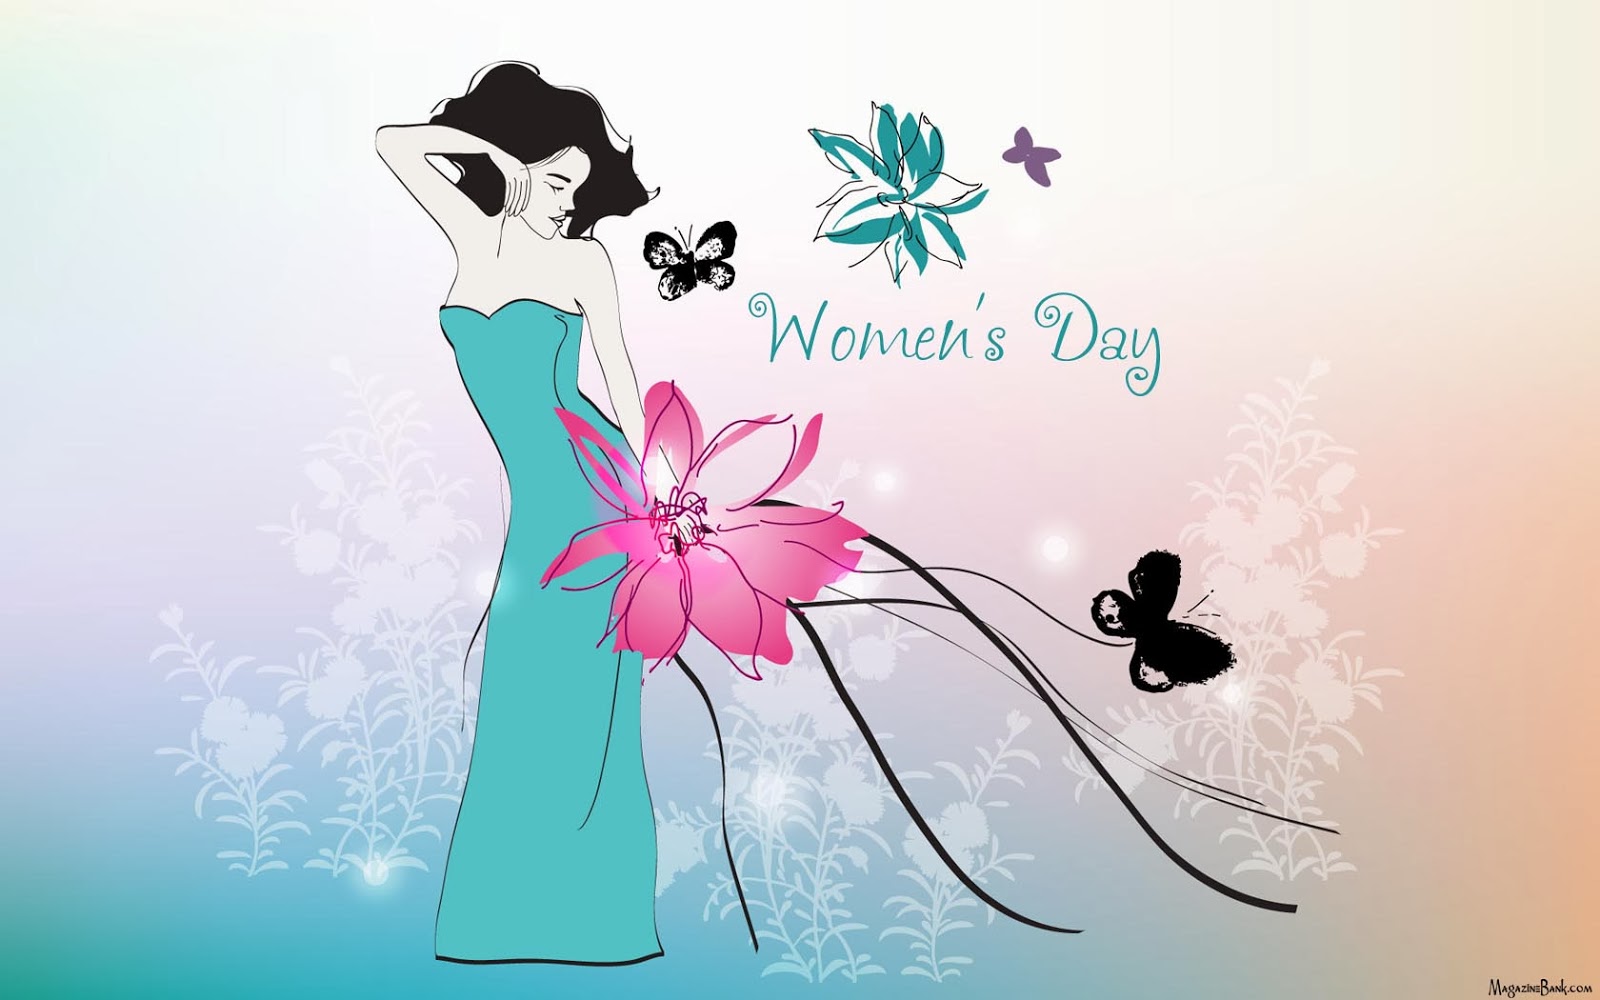 Happy Women's Day 2016 Images wallpapers (9)